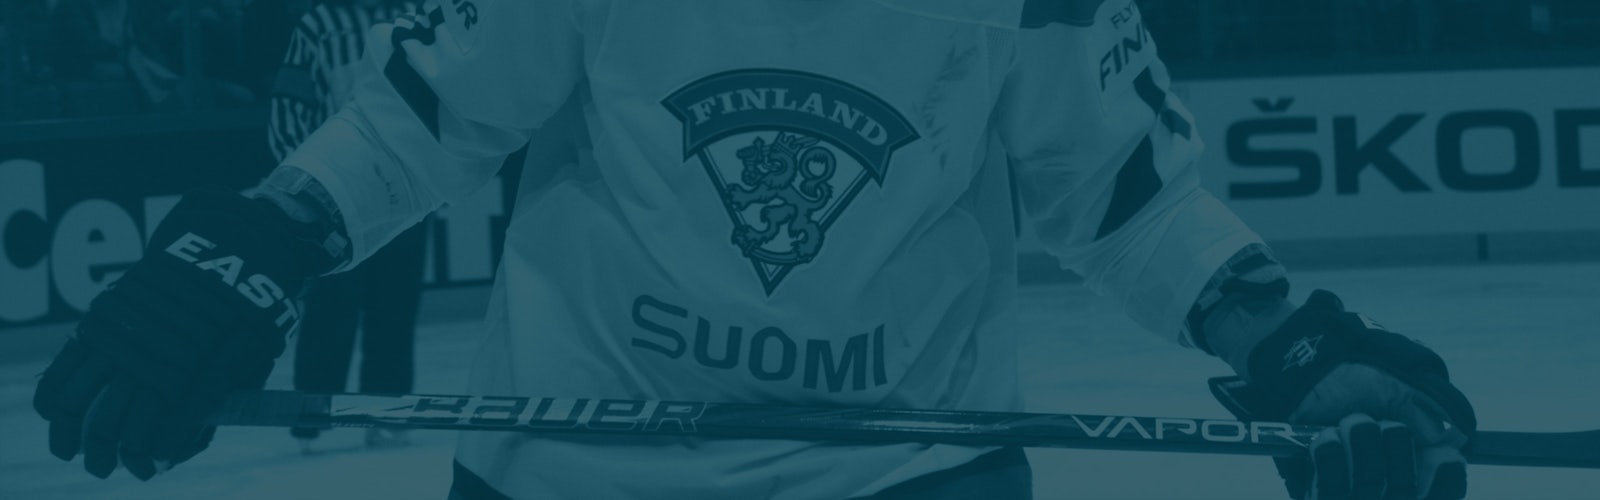 Finland betting sites